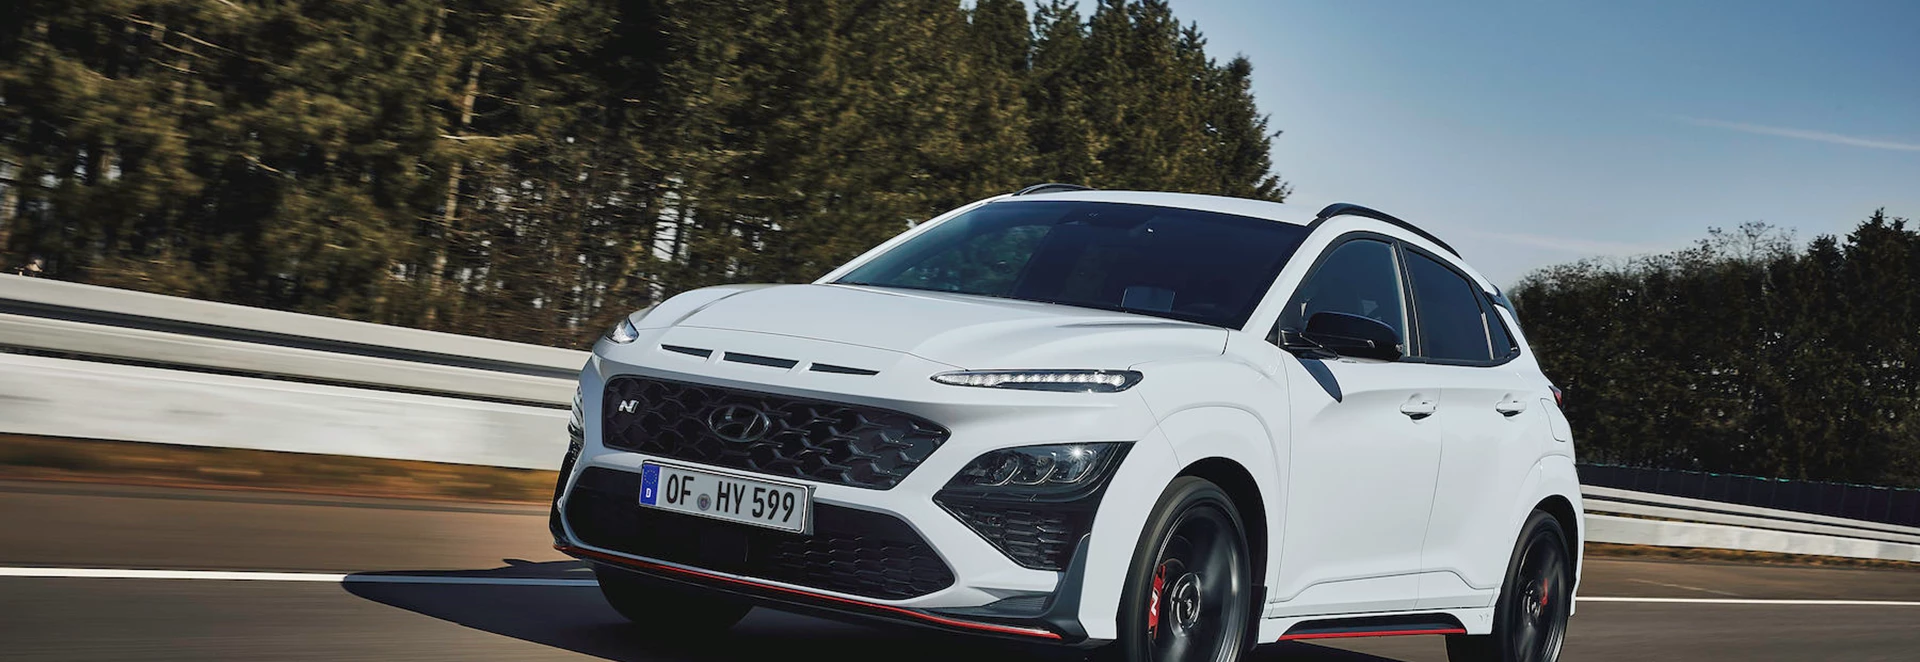 Hyundai N range: What models are available? 